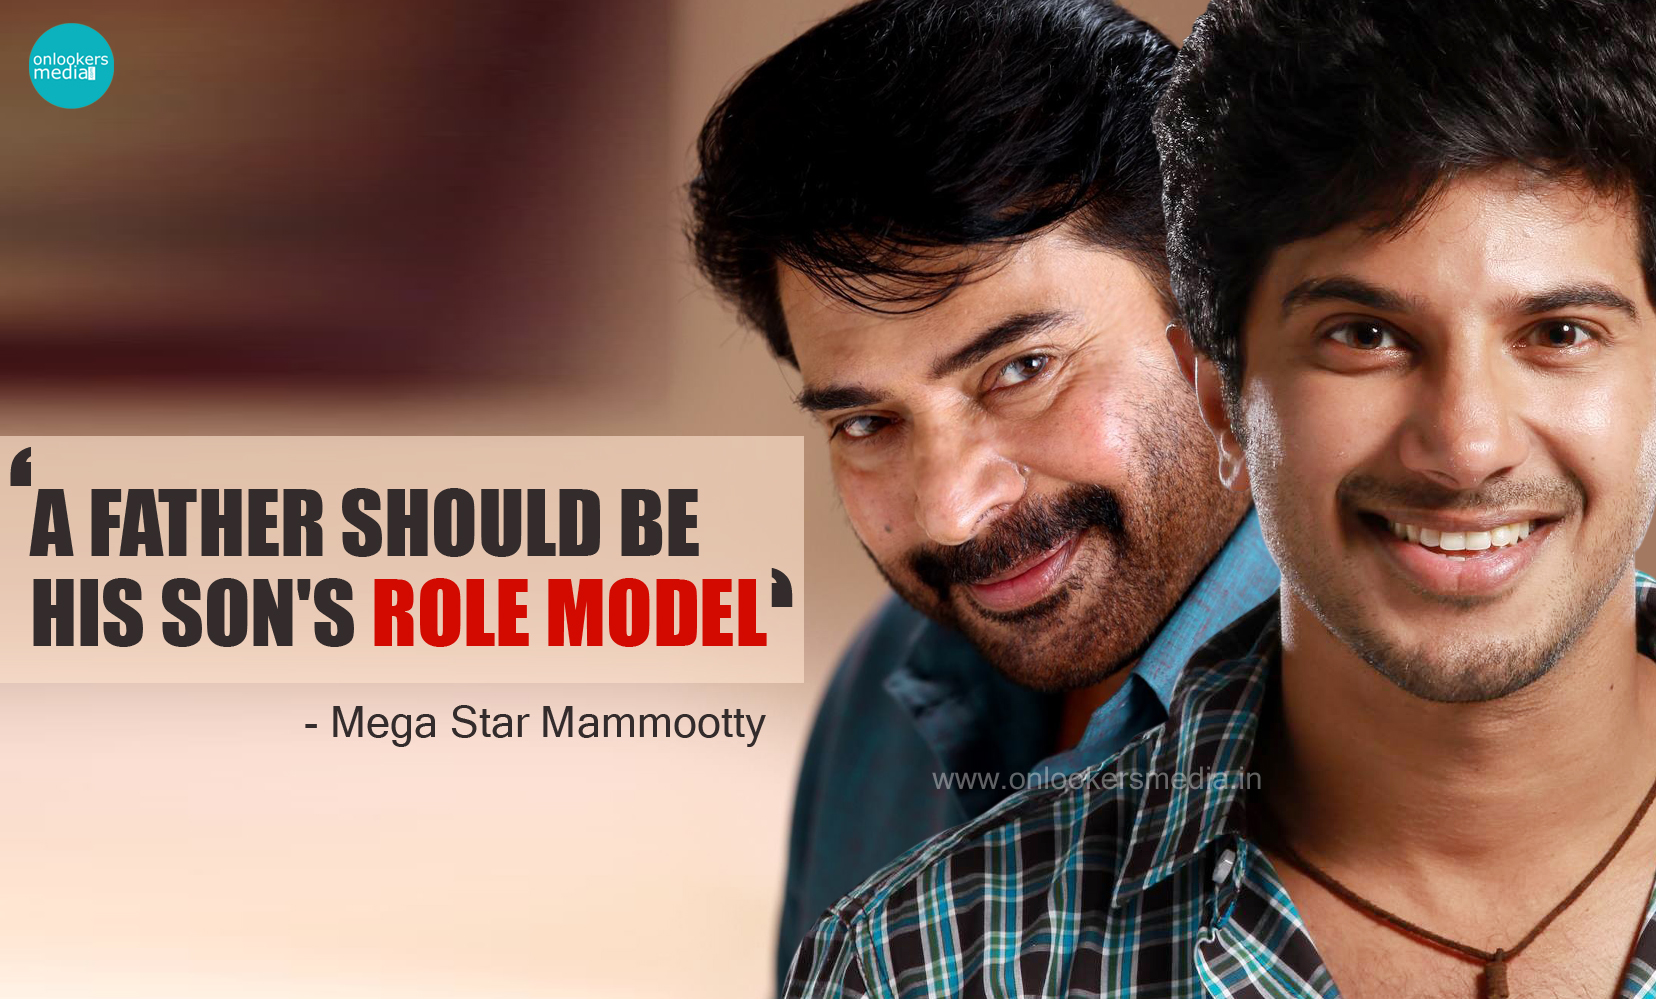 A father must be a hero for his son, says mega star Mammootty-Dulquer Salmaan-Onlookers Media